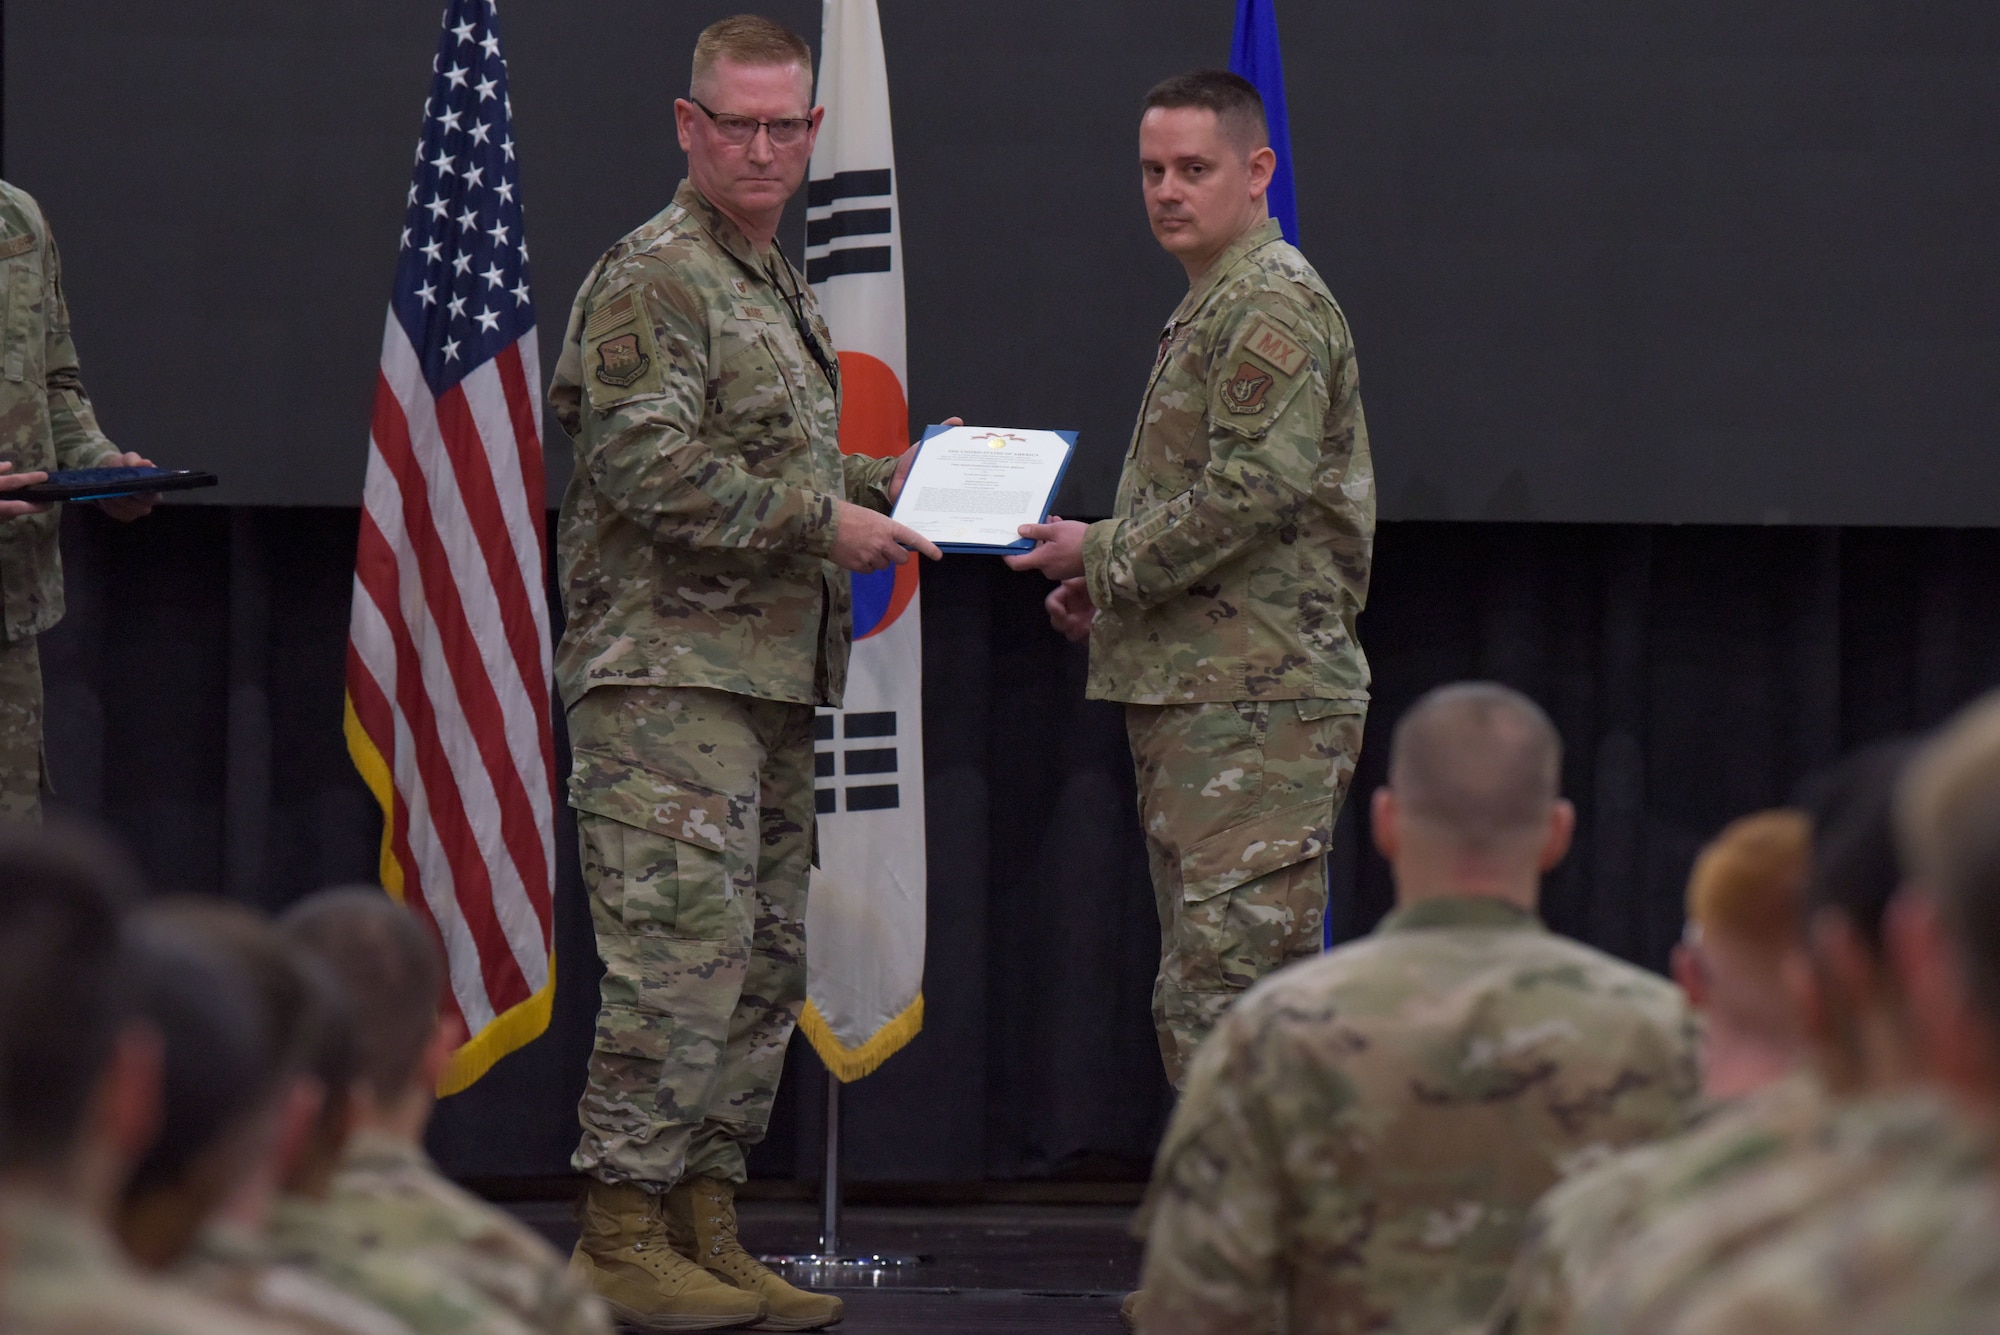 Col. Brian Moore, left, 51st Maintenance Group commander, presents a Meritorious Service Medal certificate to Maj. Benjamin Abshire, 51st Maintenance Squadron outgoing commander, during 51st MXS change of command ceremony at Osan Air Base, Republic of Korea, May 23, 2022.